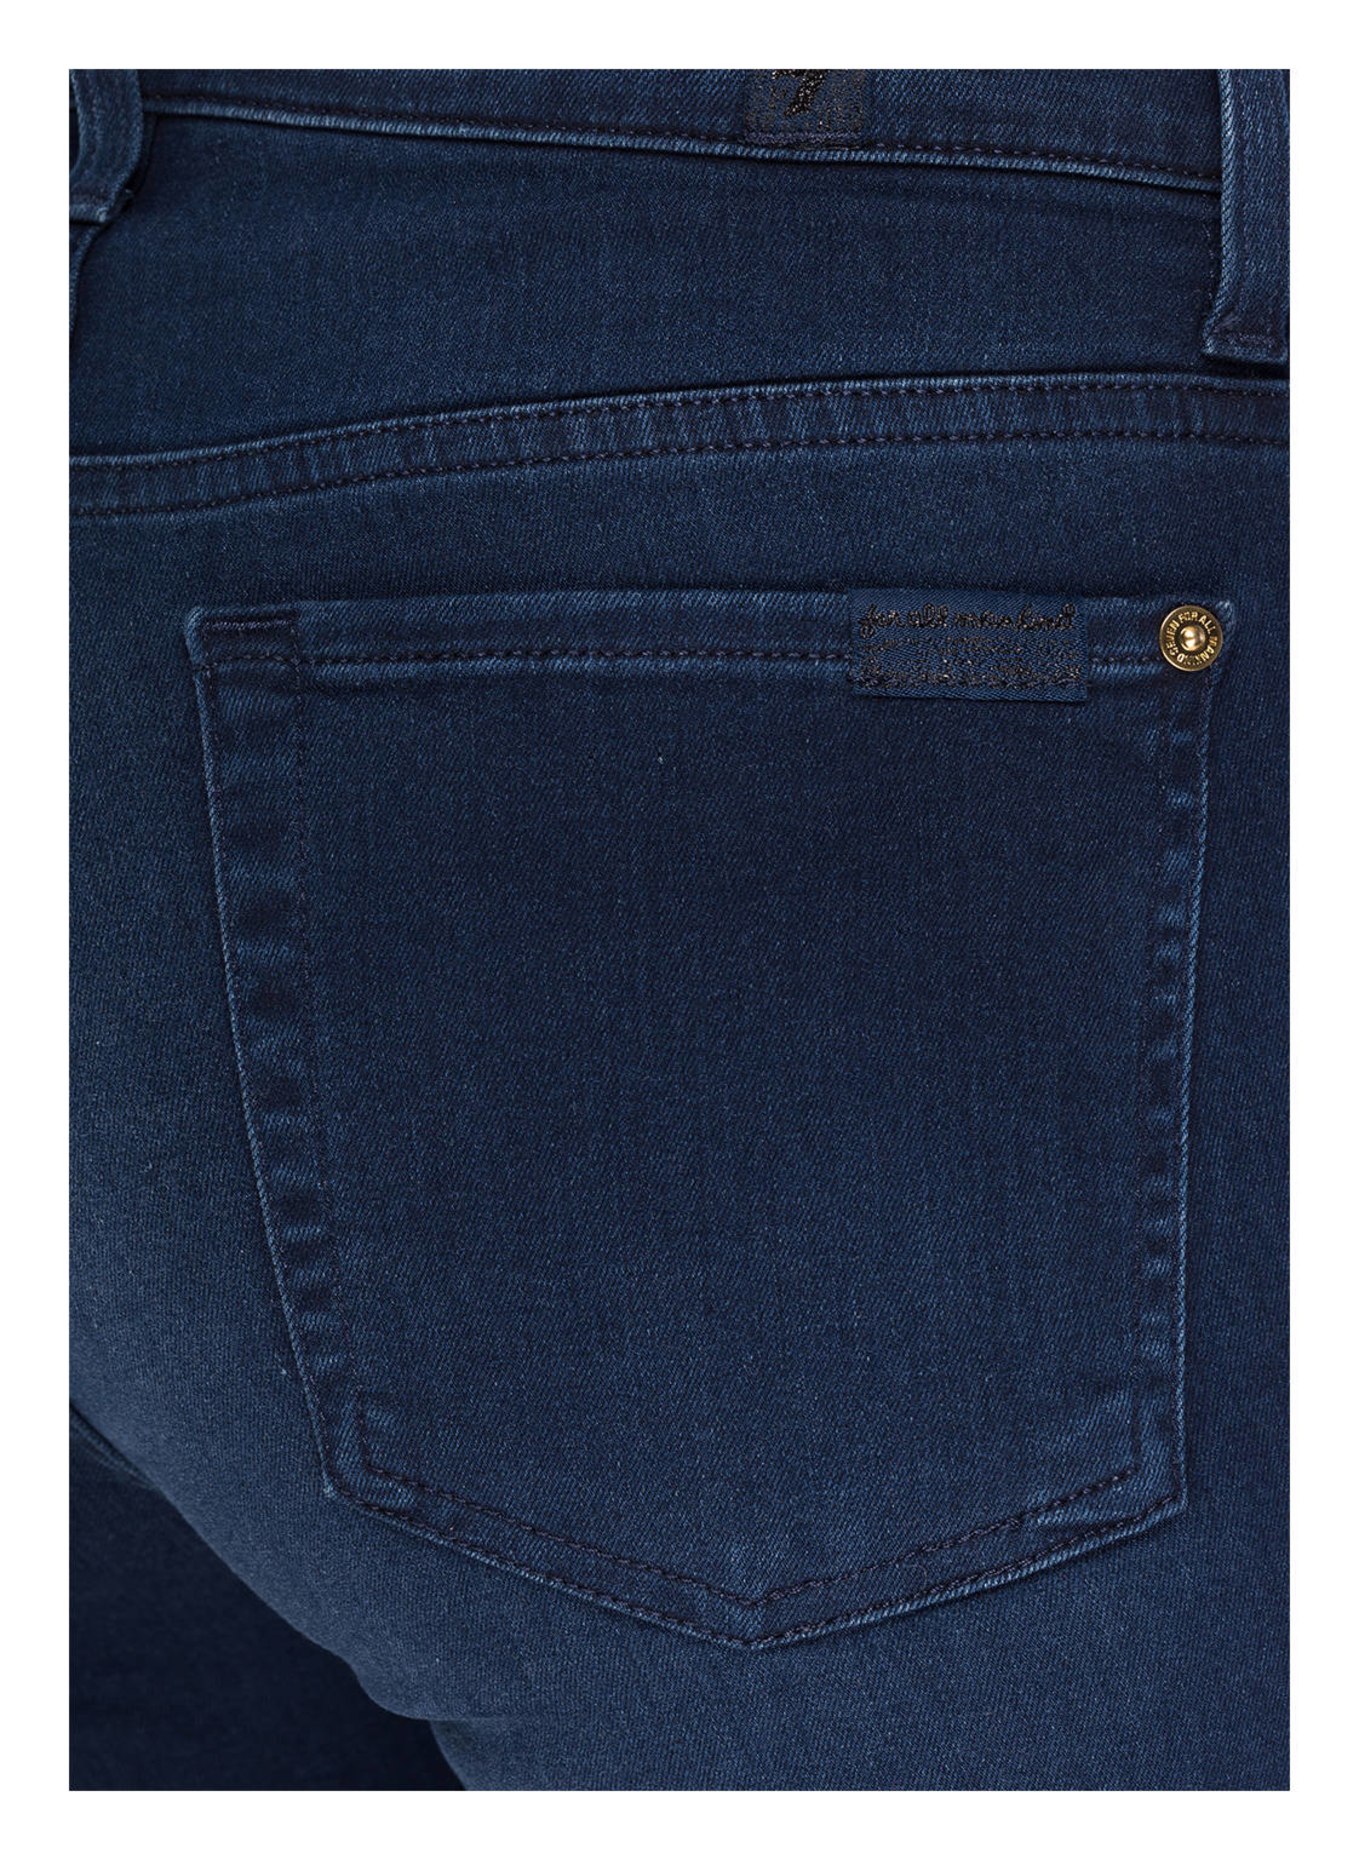 7 for all mankind Skinny jeans , Color: SLIM ILLUSION LUXE RICH INDIGO (Image 5)